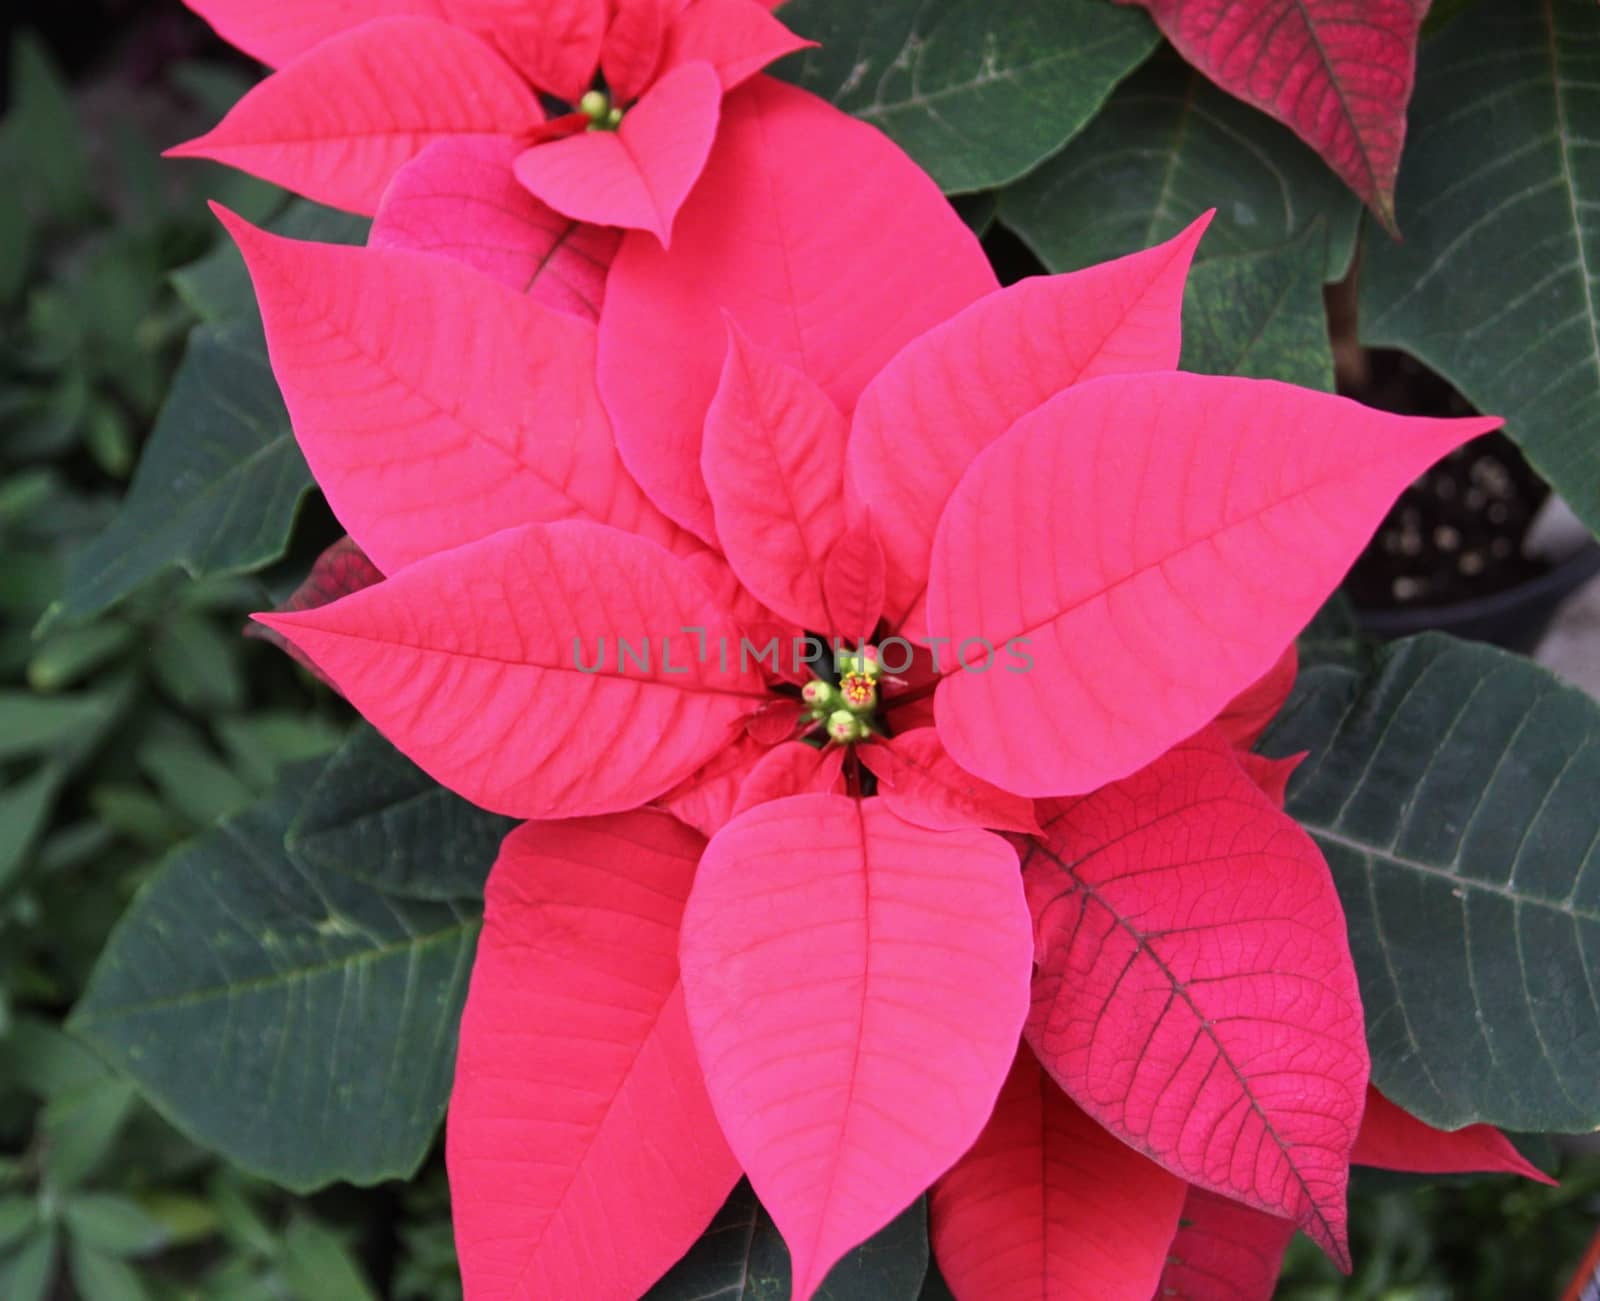 beautiful red poinsettia by jnerad